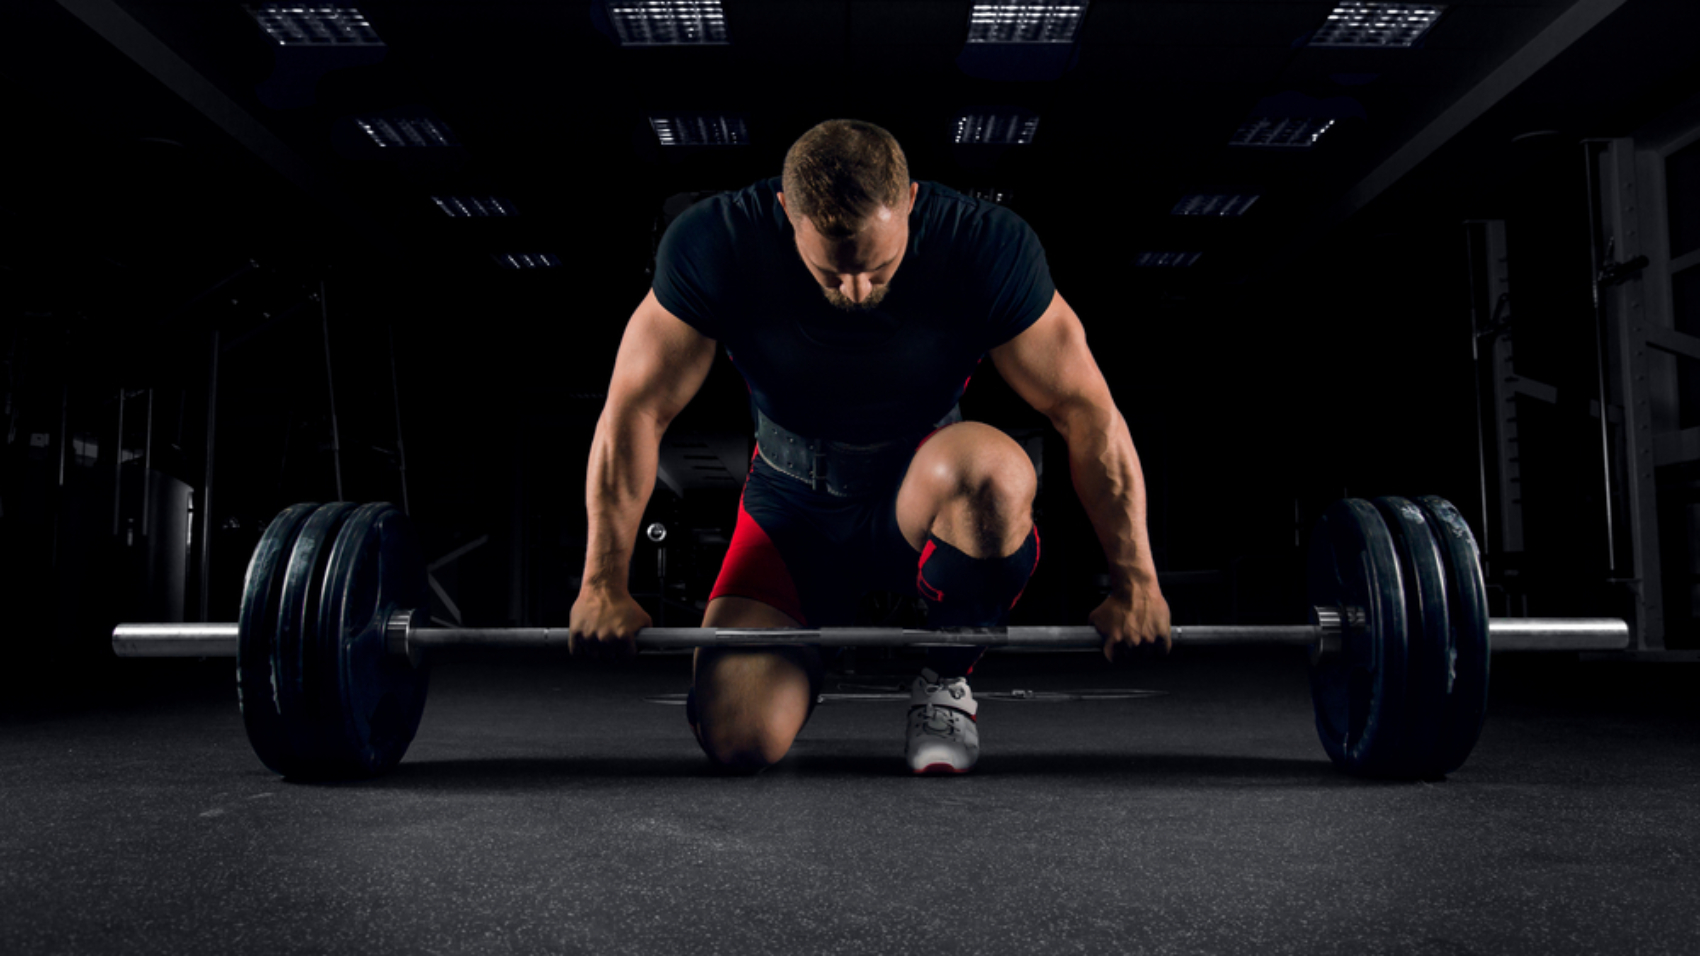 Athlete,Is,Standing,On,His,Knee,And,Near,The,Bar